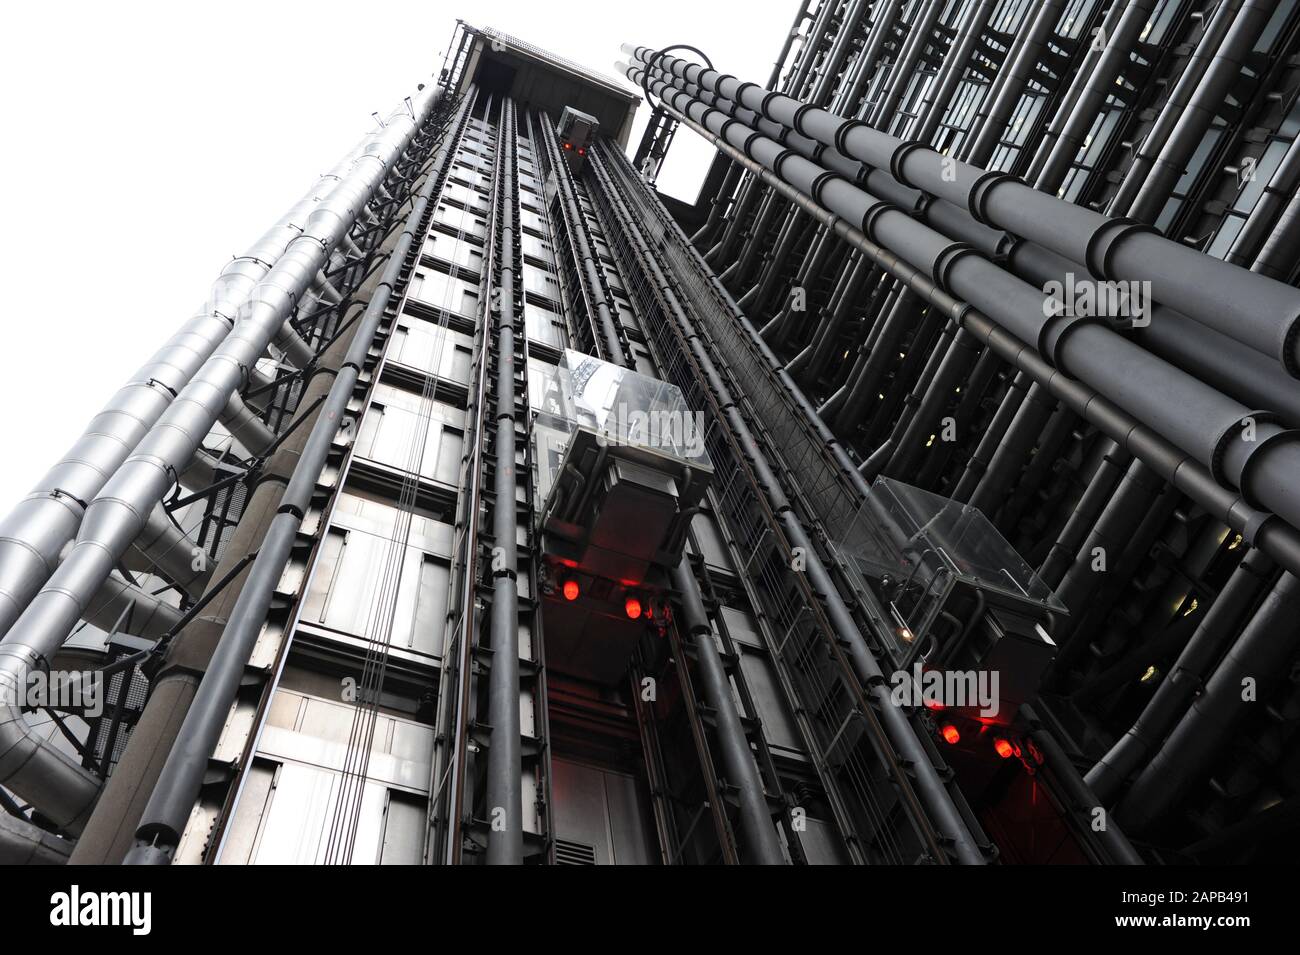 The lifts in the Lloyd's of London building in London, England Stock Photo